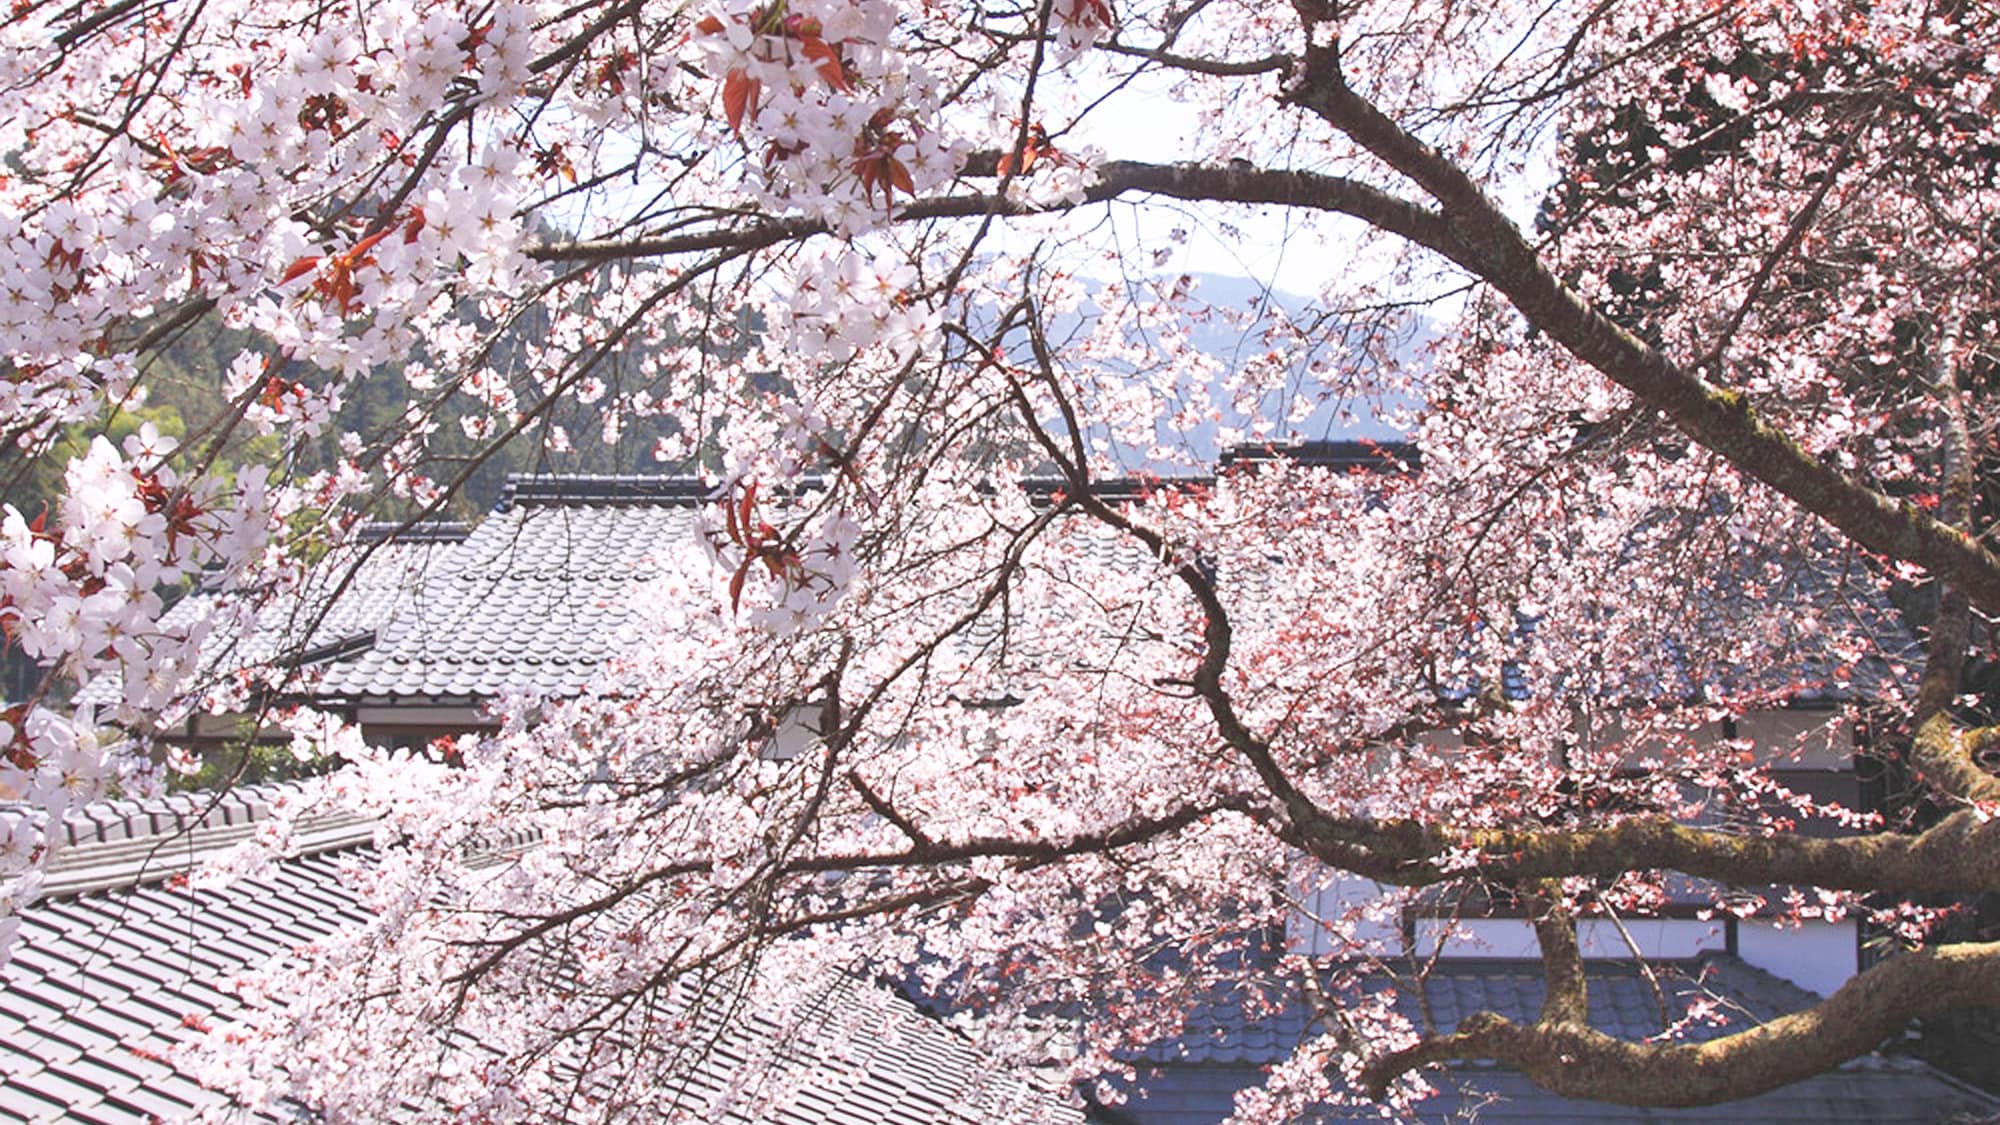 * [Spring courtyard] Overlooking the cherry blossoms in the courtyard